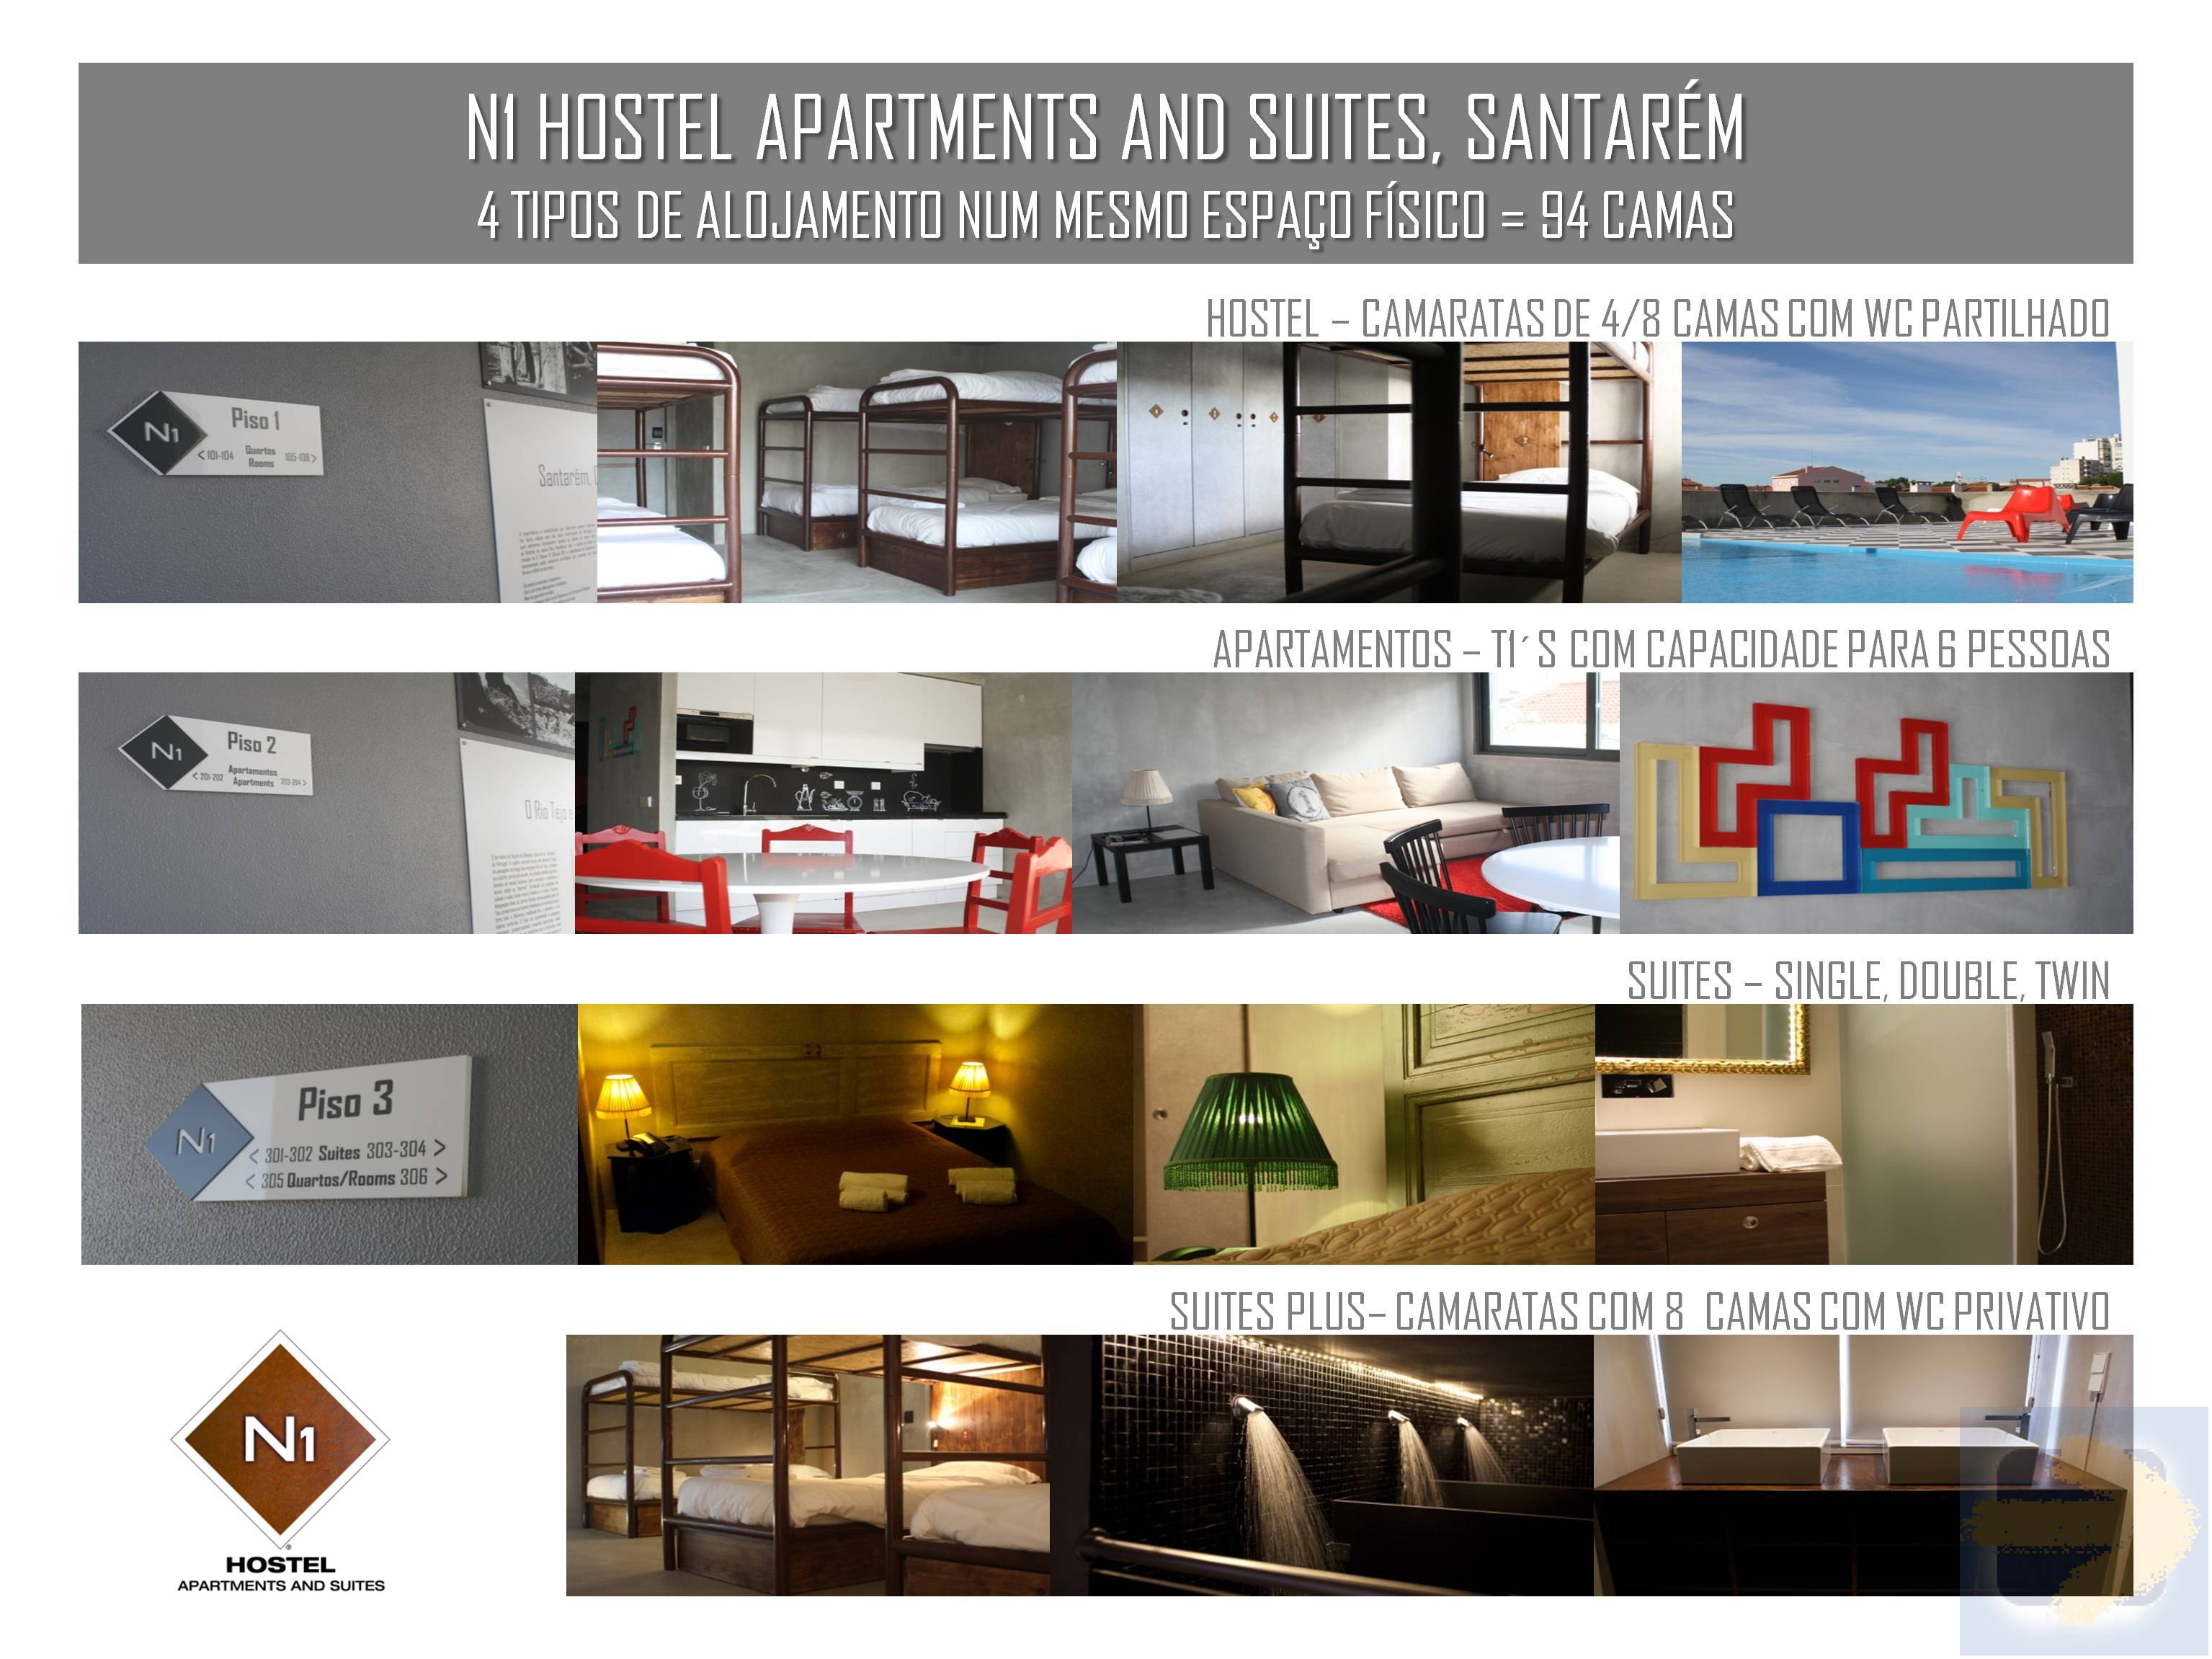 4 types of accomodation in one building